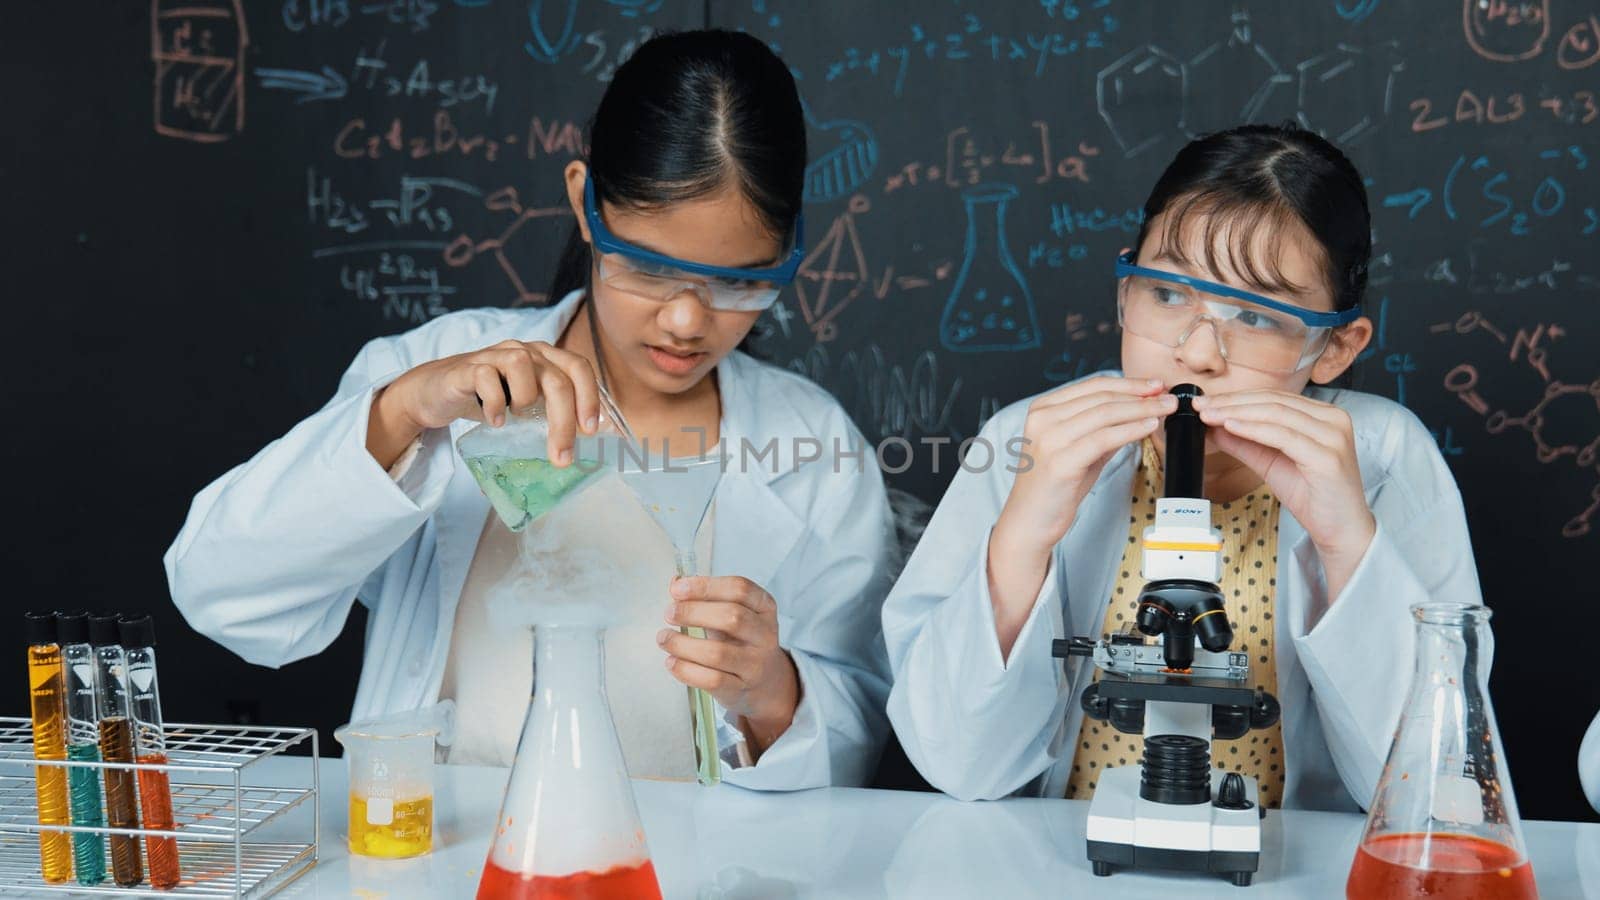 Young highschool student doing experiment by pouring sample in test tube. Girl wearing glasses and looking under microscope to inspect sample in STEM science class. Creative education. Edification.